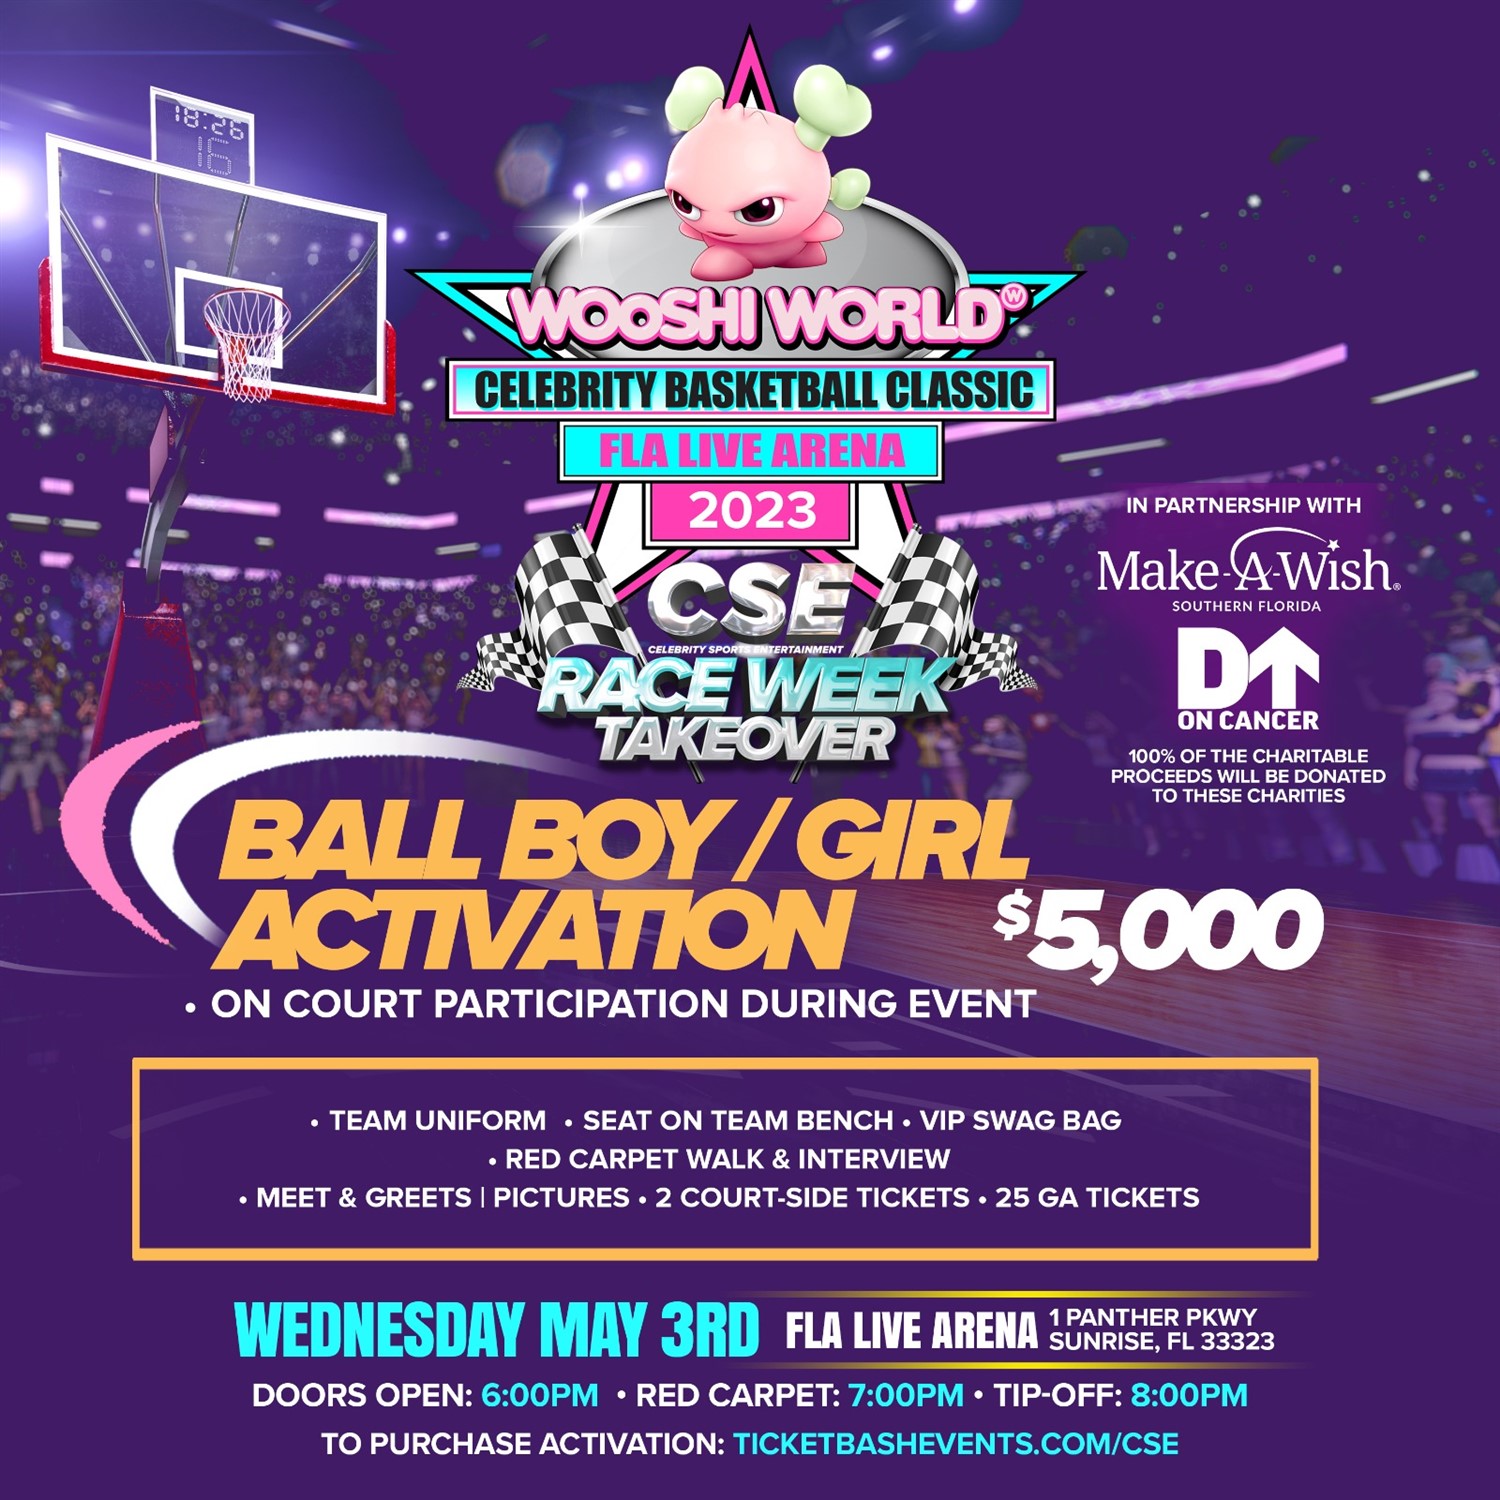 CHELZZZ™ on Instagram: It's Going Down on Wednesday, May 3rd The 1st  Annual @Wooshi.World Celebrity Basketball Classic @FLALIVEARENA ! Watch  Some of The Biggest Star Studded Athletes, Celebrities & Influencers face  off